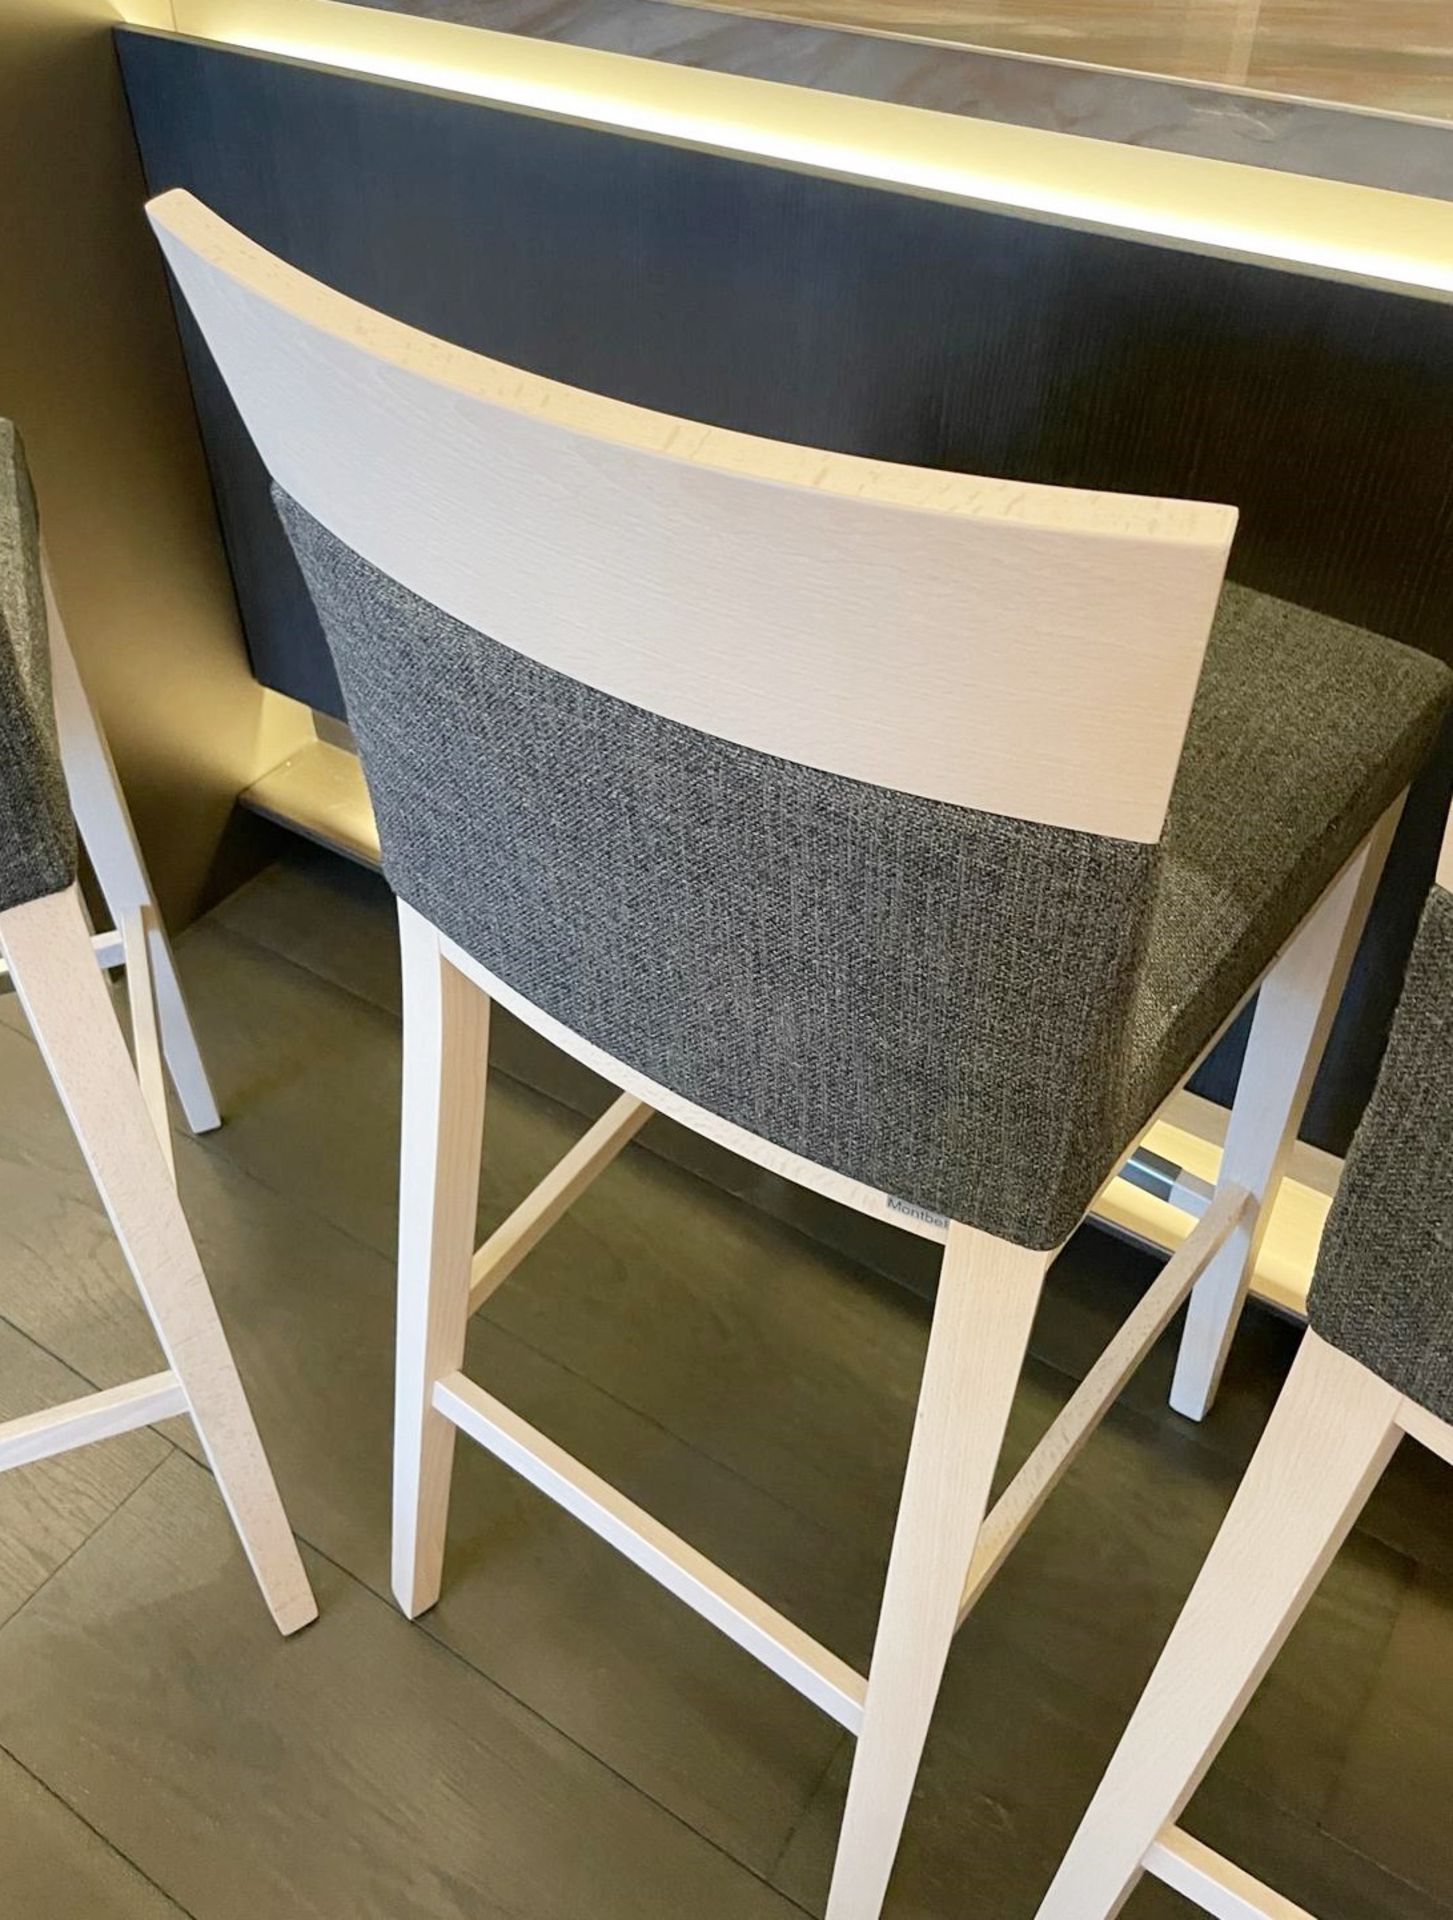 3 x MONTBEL Designer Bar Stools With Light Stained Frames And Grey Fabric Upholstery - Image 12 of 18